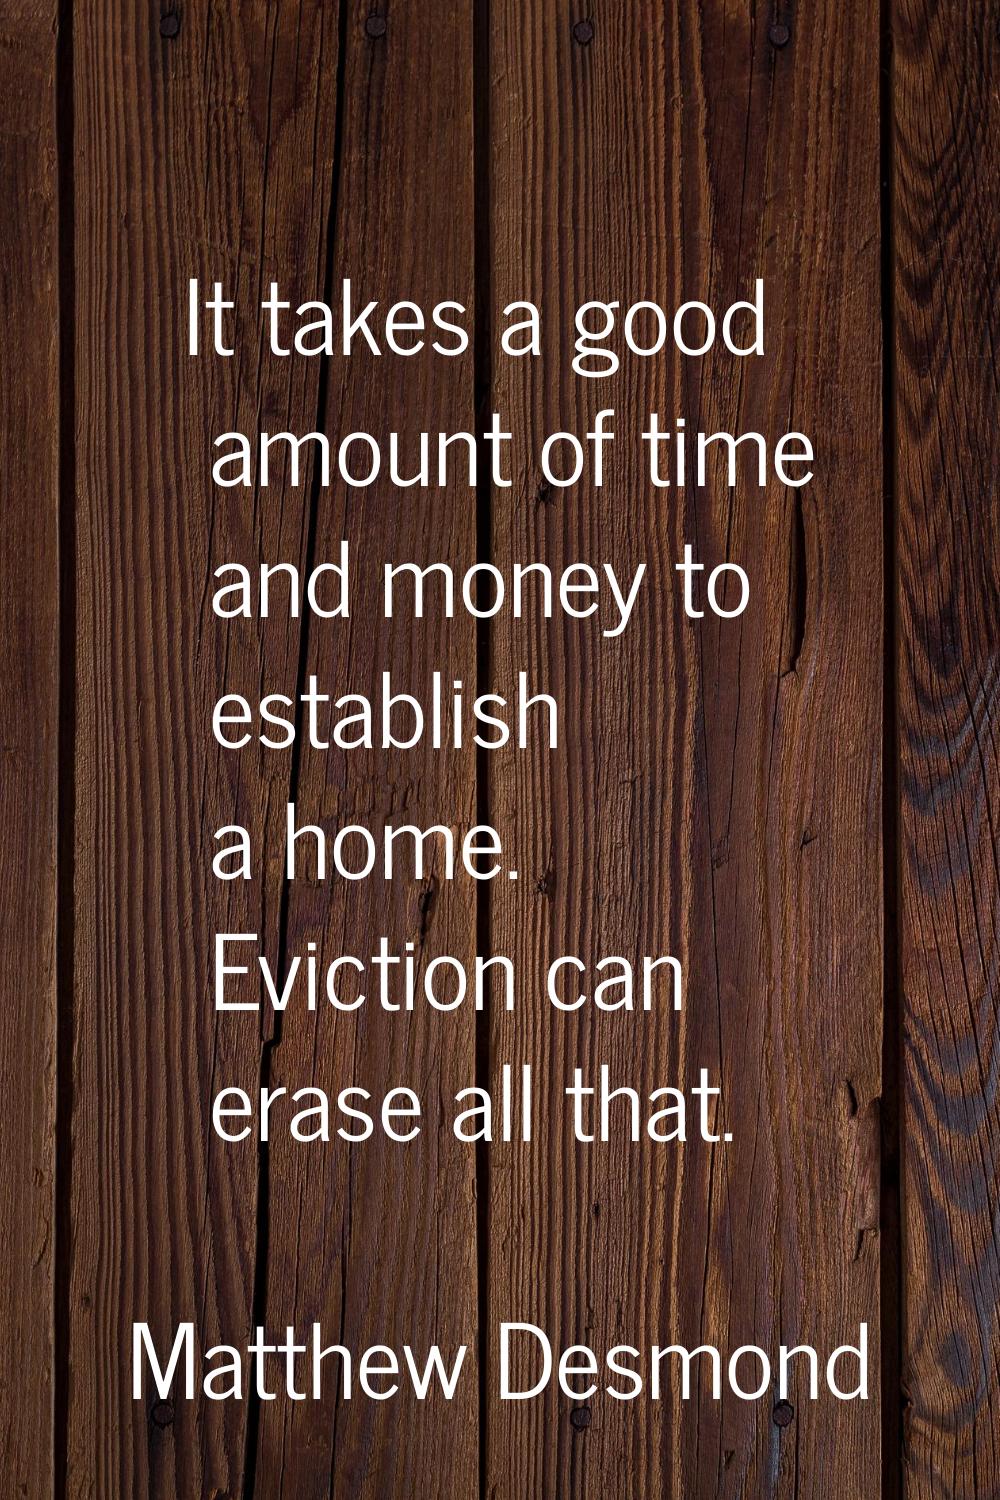 It takes a good amount of time and money to establish a home. Eviction can erase all that.